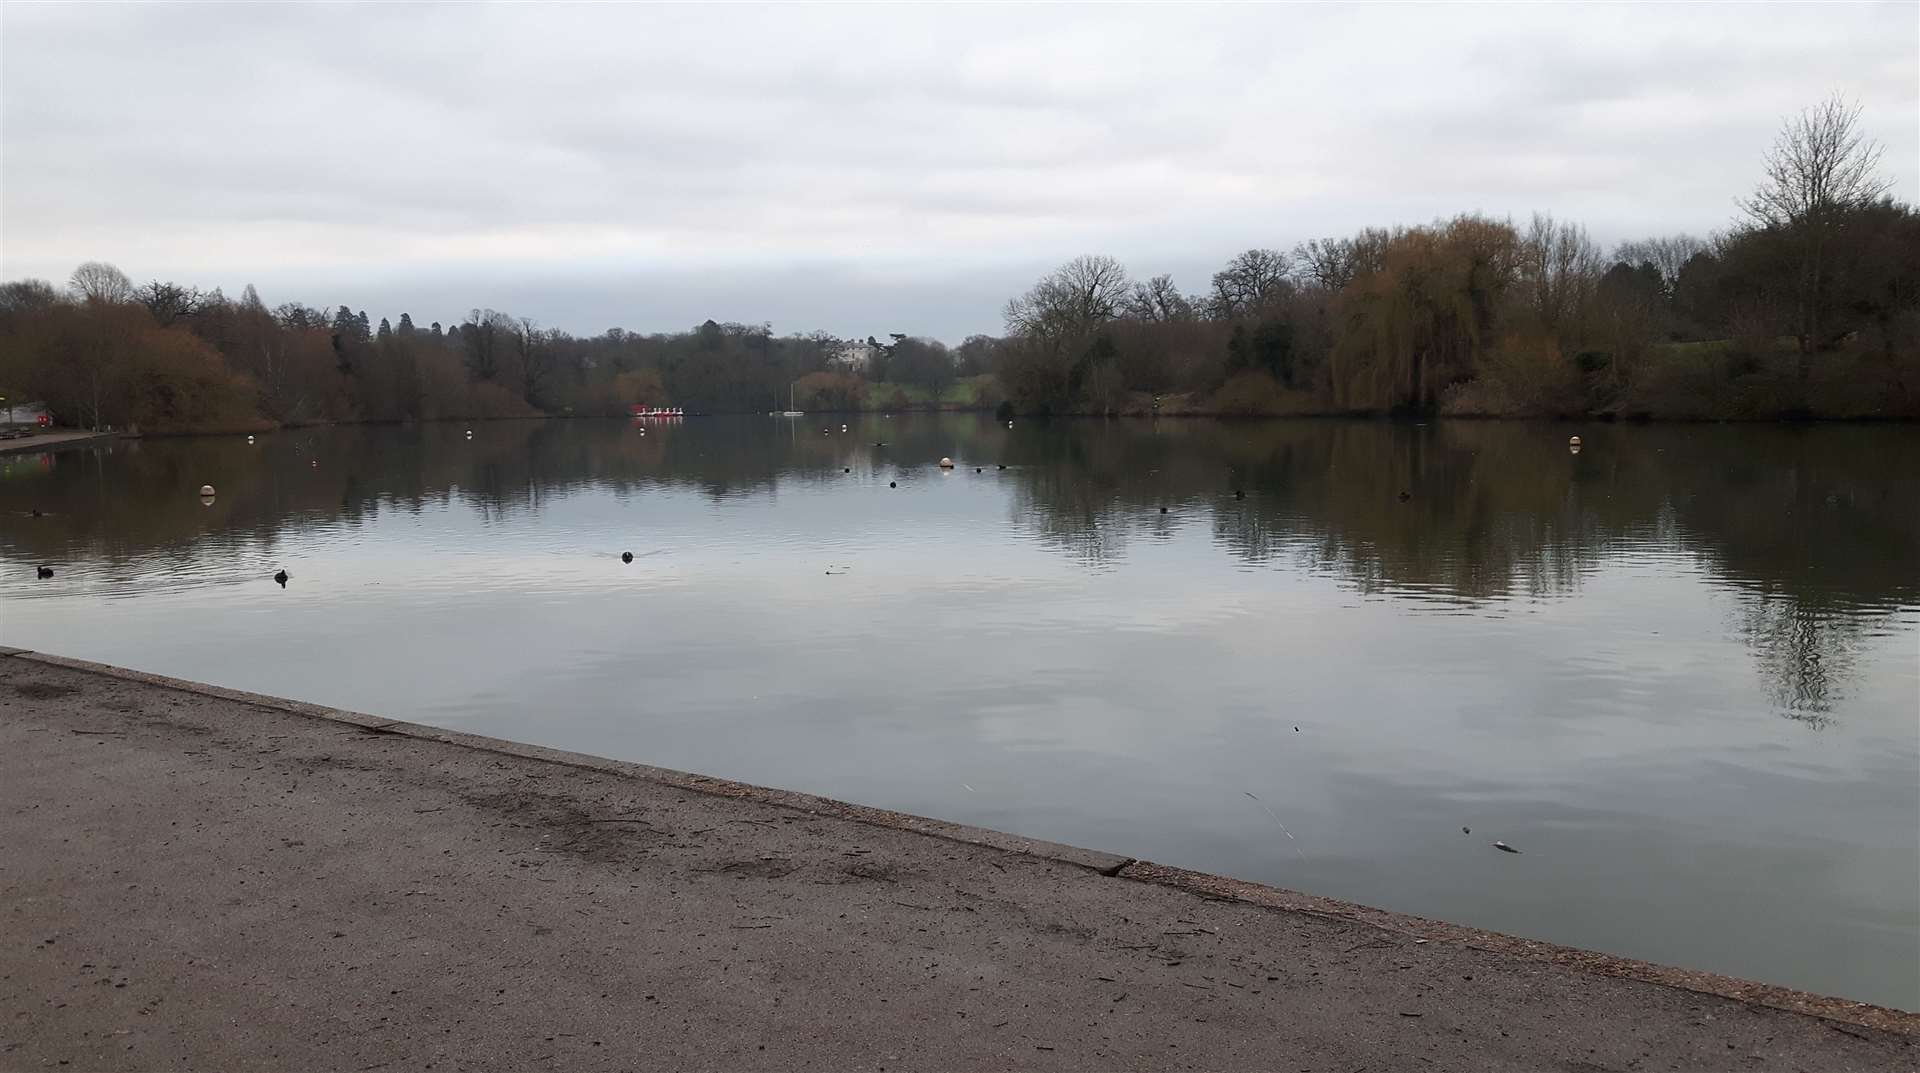 A suspected wartime explosive has been found at the lake at Mote Park in Maidstone